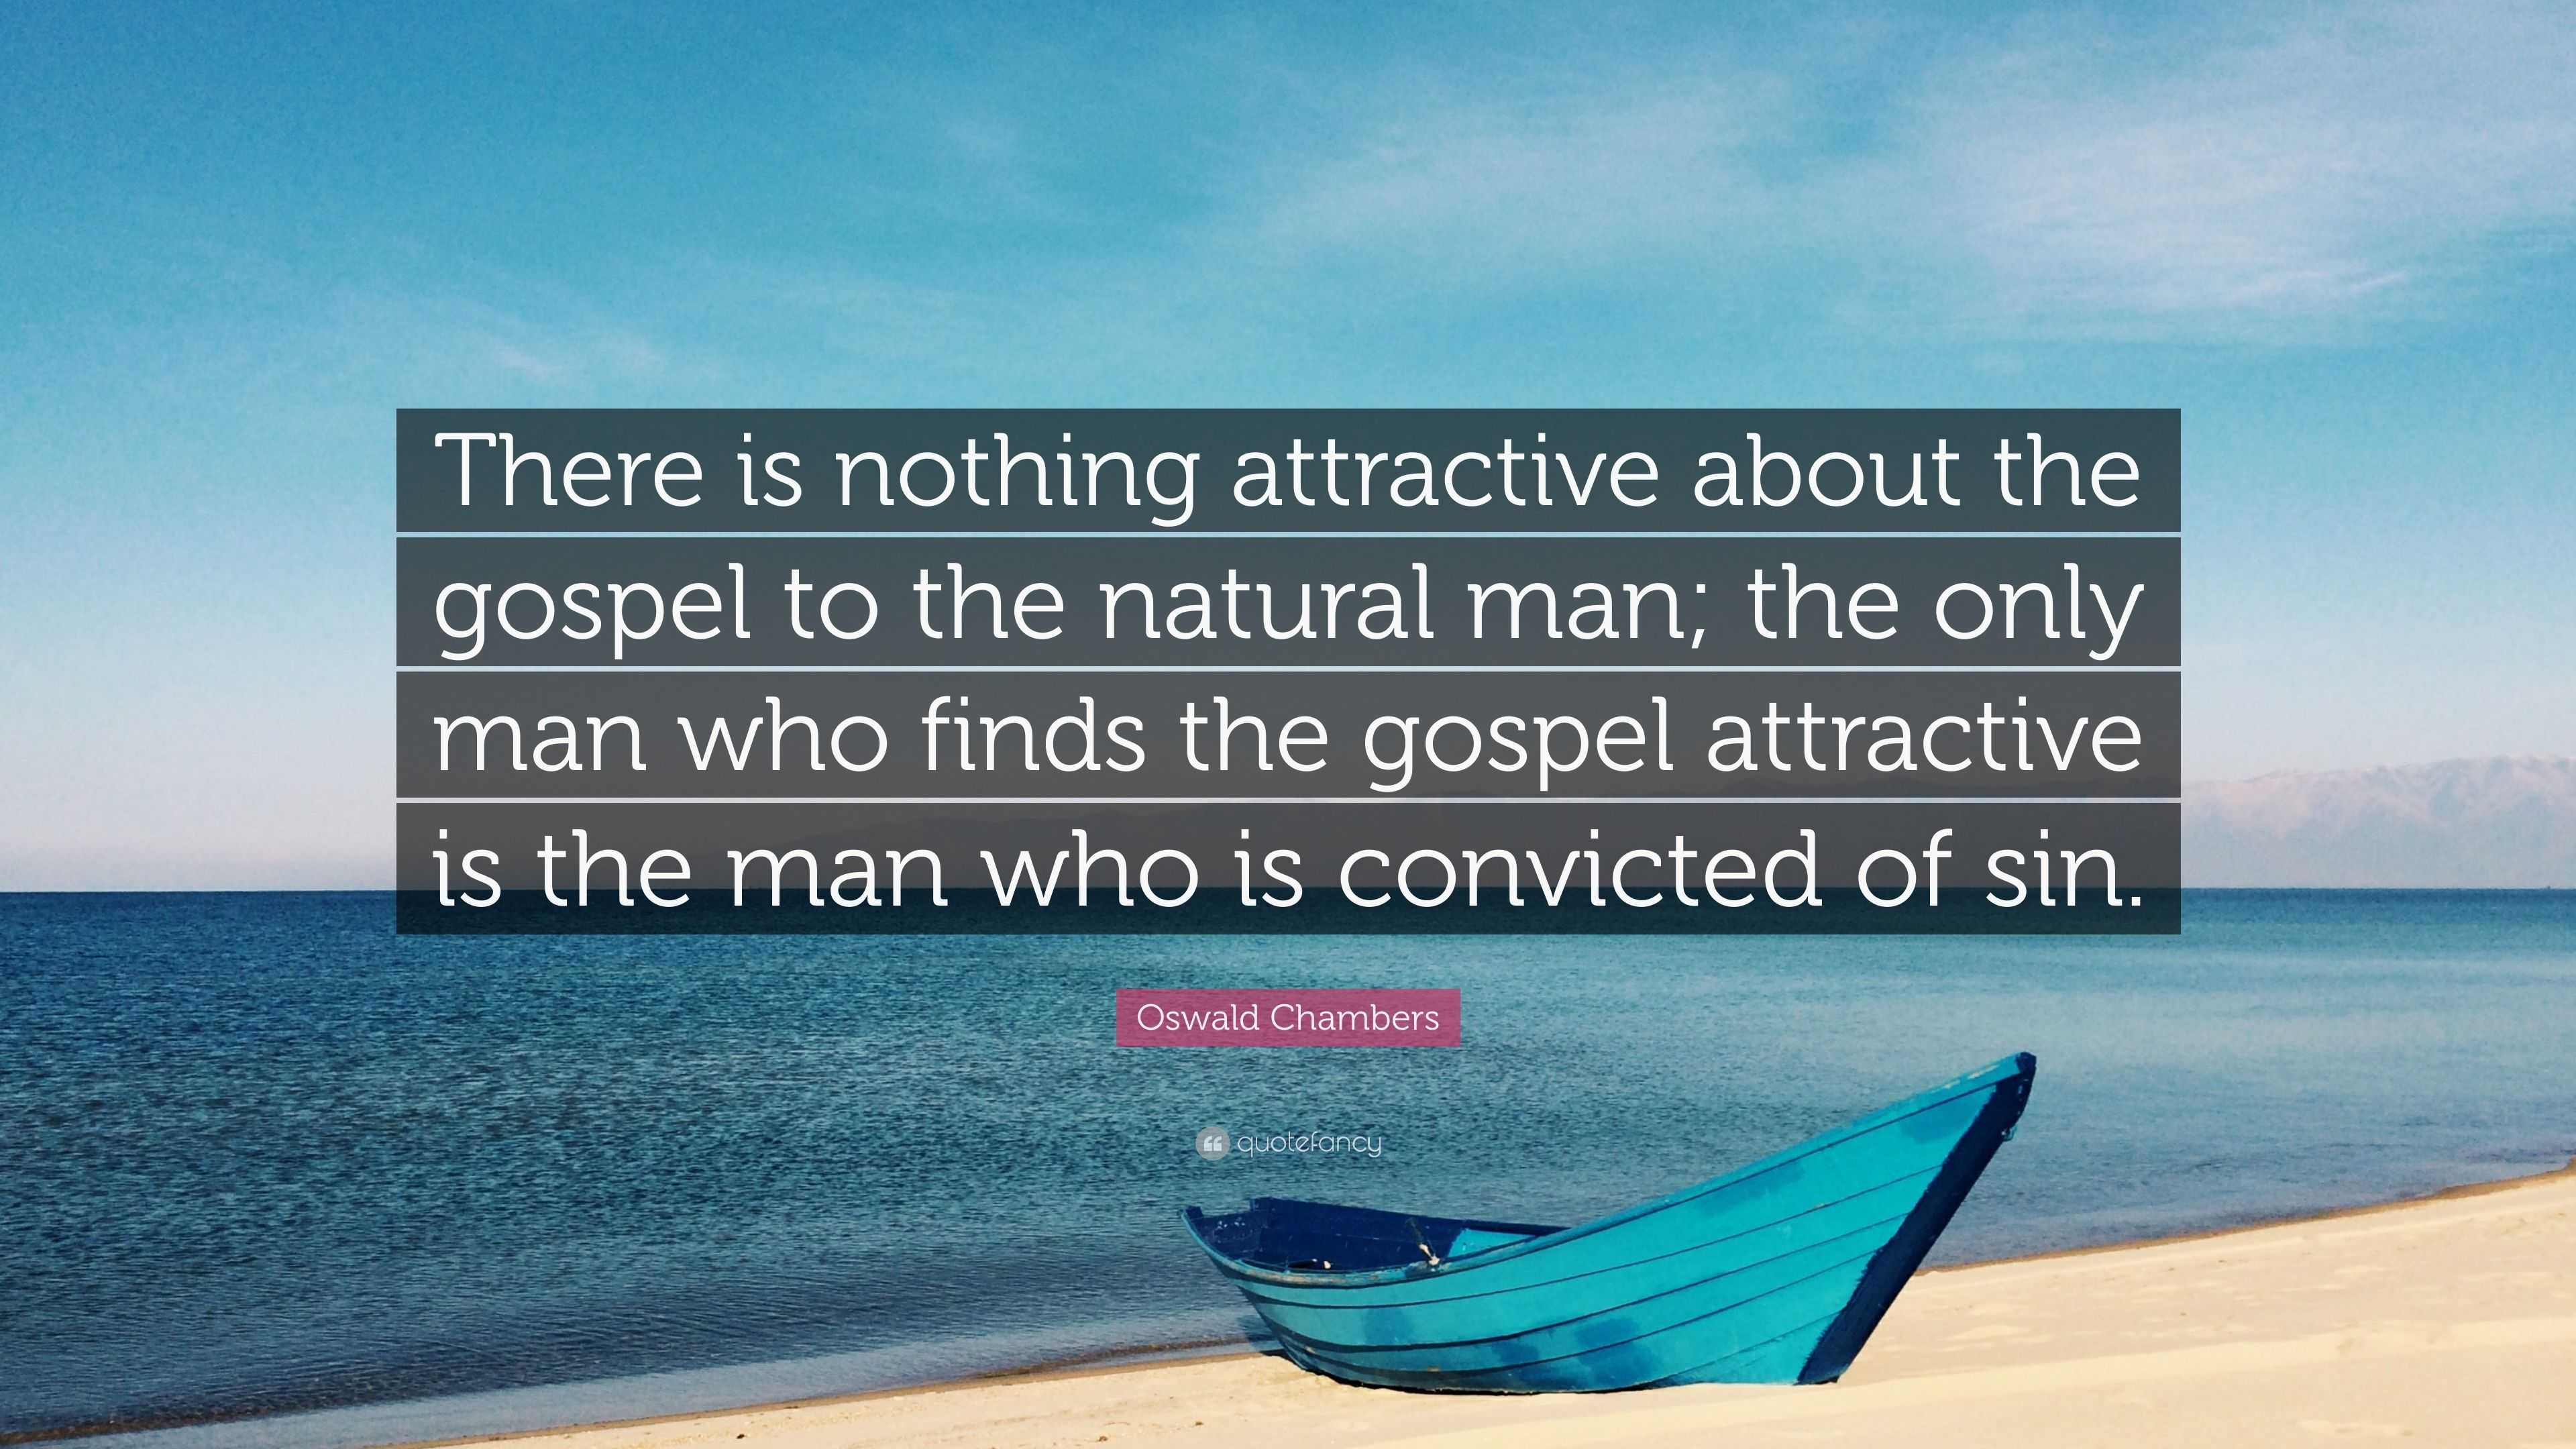 Oswald Chambers Quote: “There is nothing attractive about the gospel to ...